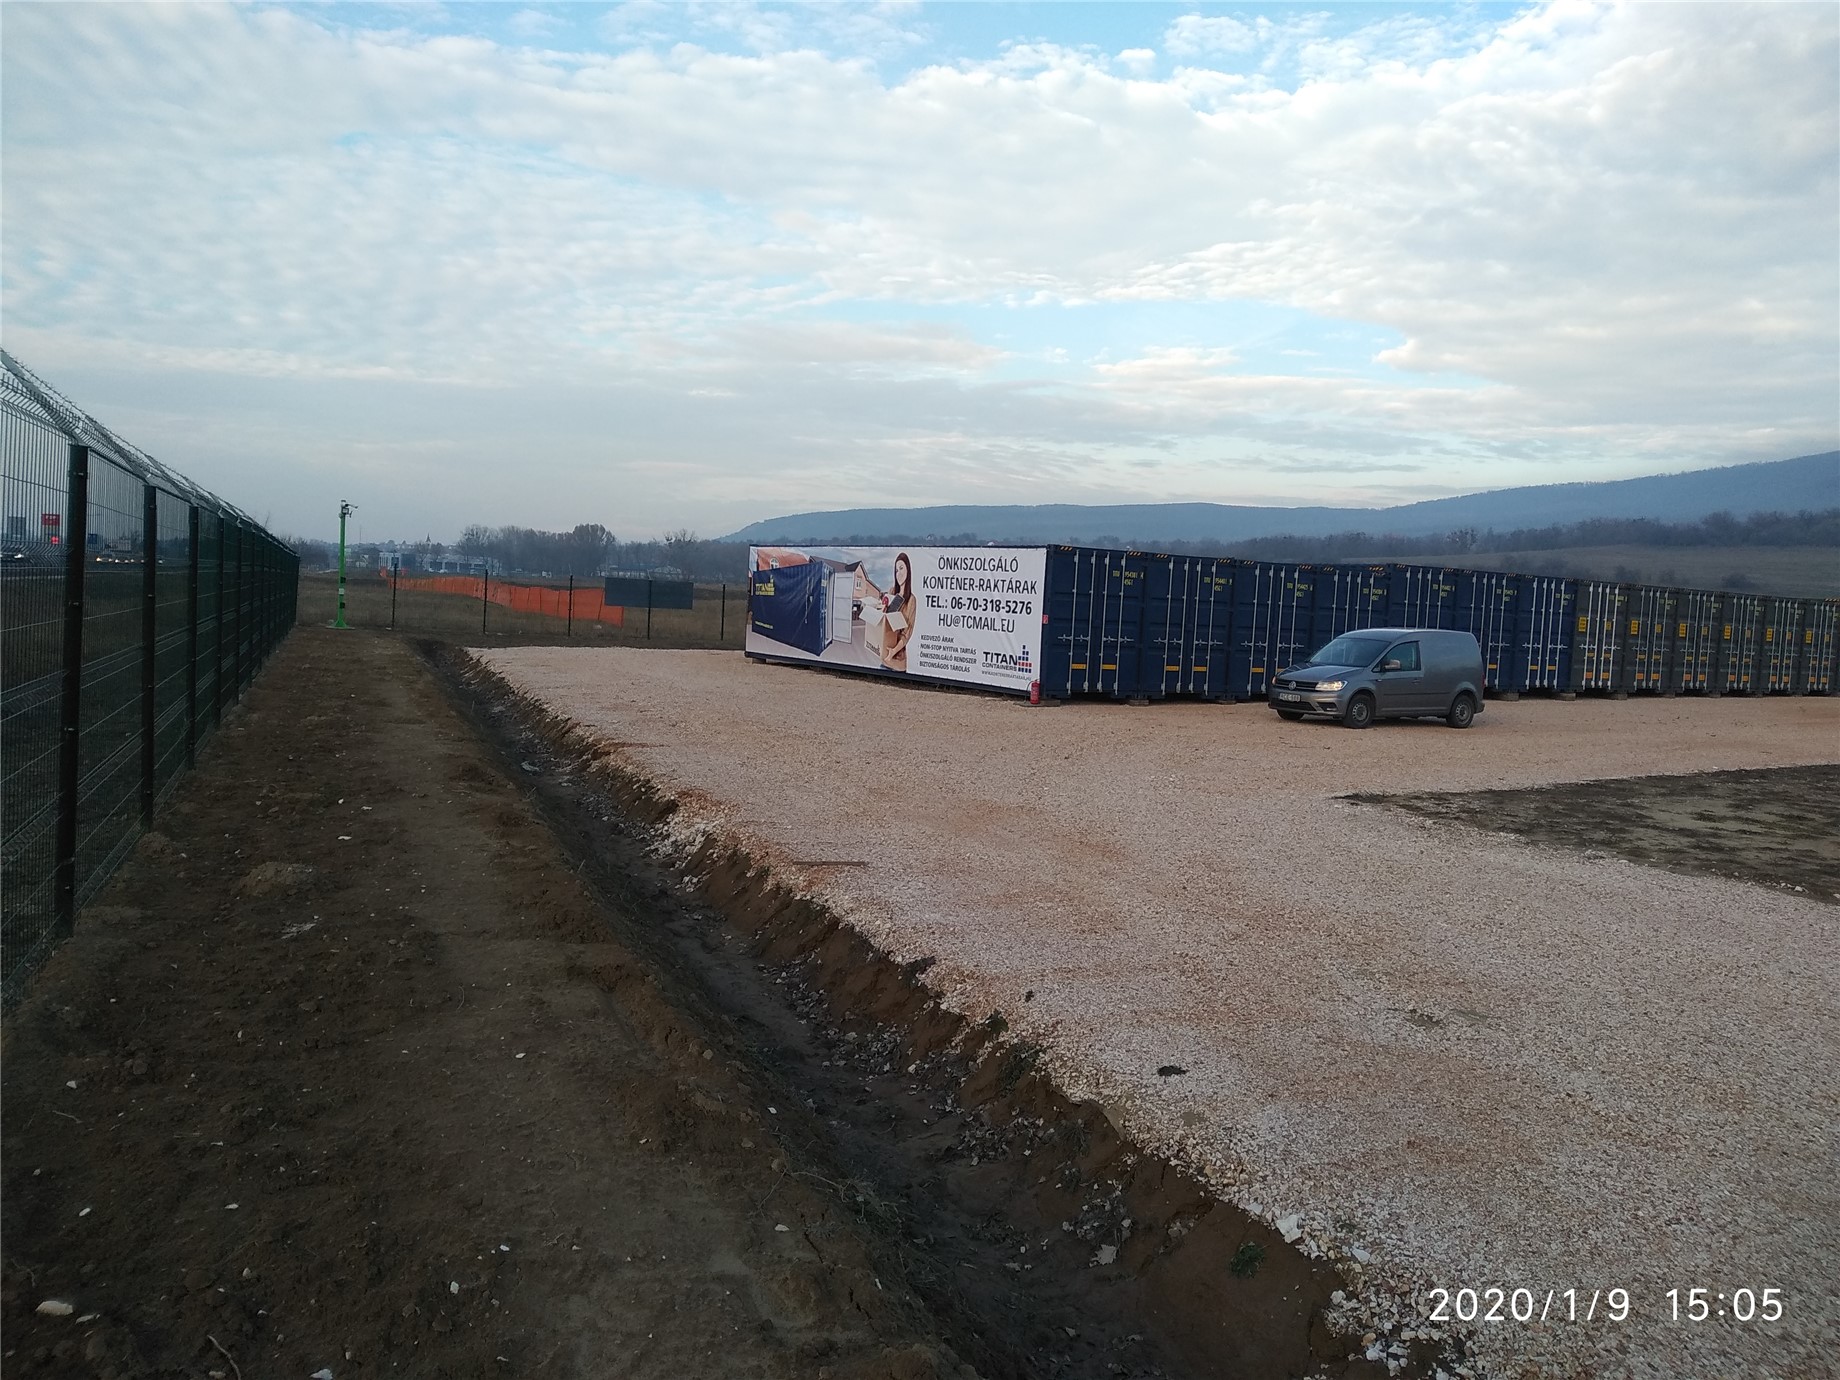 TITAN CONTAINERS INAUGURATES ANOTHER SELF-STORAGE IN HUNGARY2